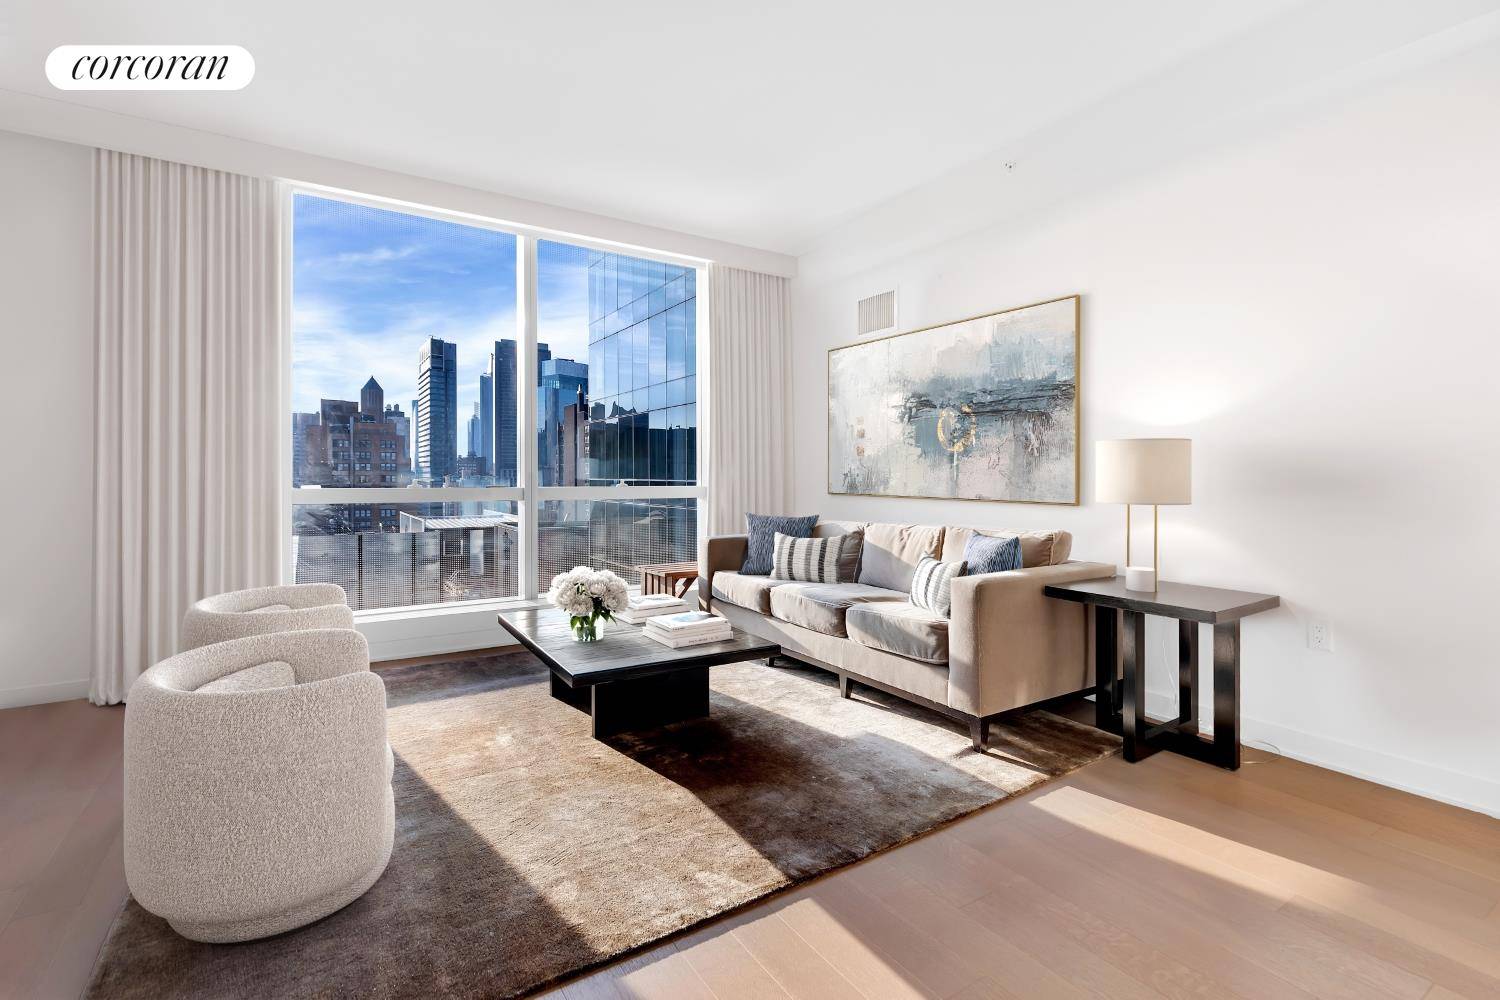 With near floor to ceiling west facing windows in every room and two exposures in the primary suite, this stunning luxury NoMad home is sun drenched throughout the day with ...